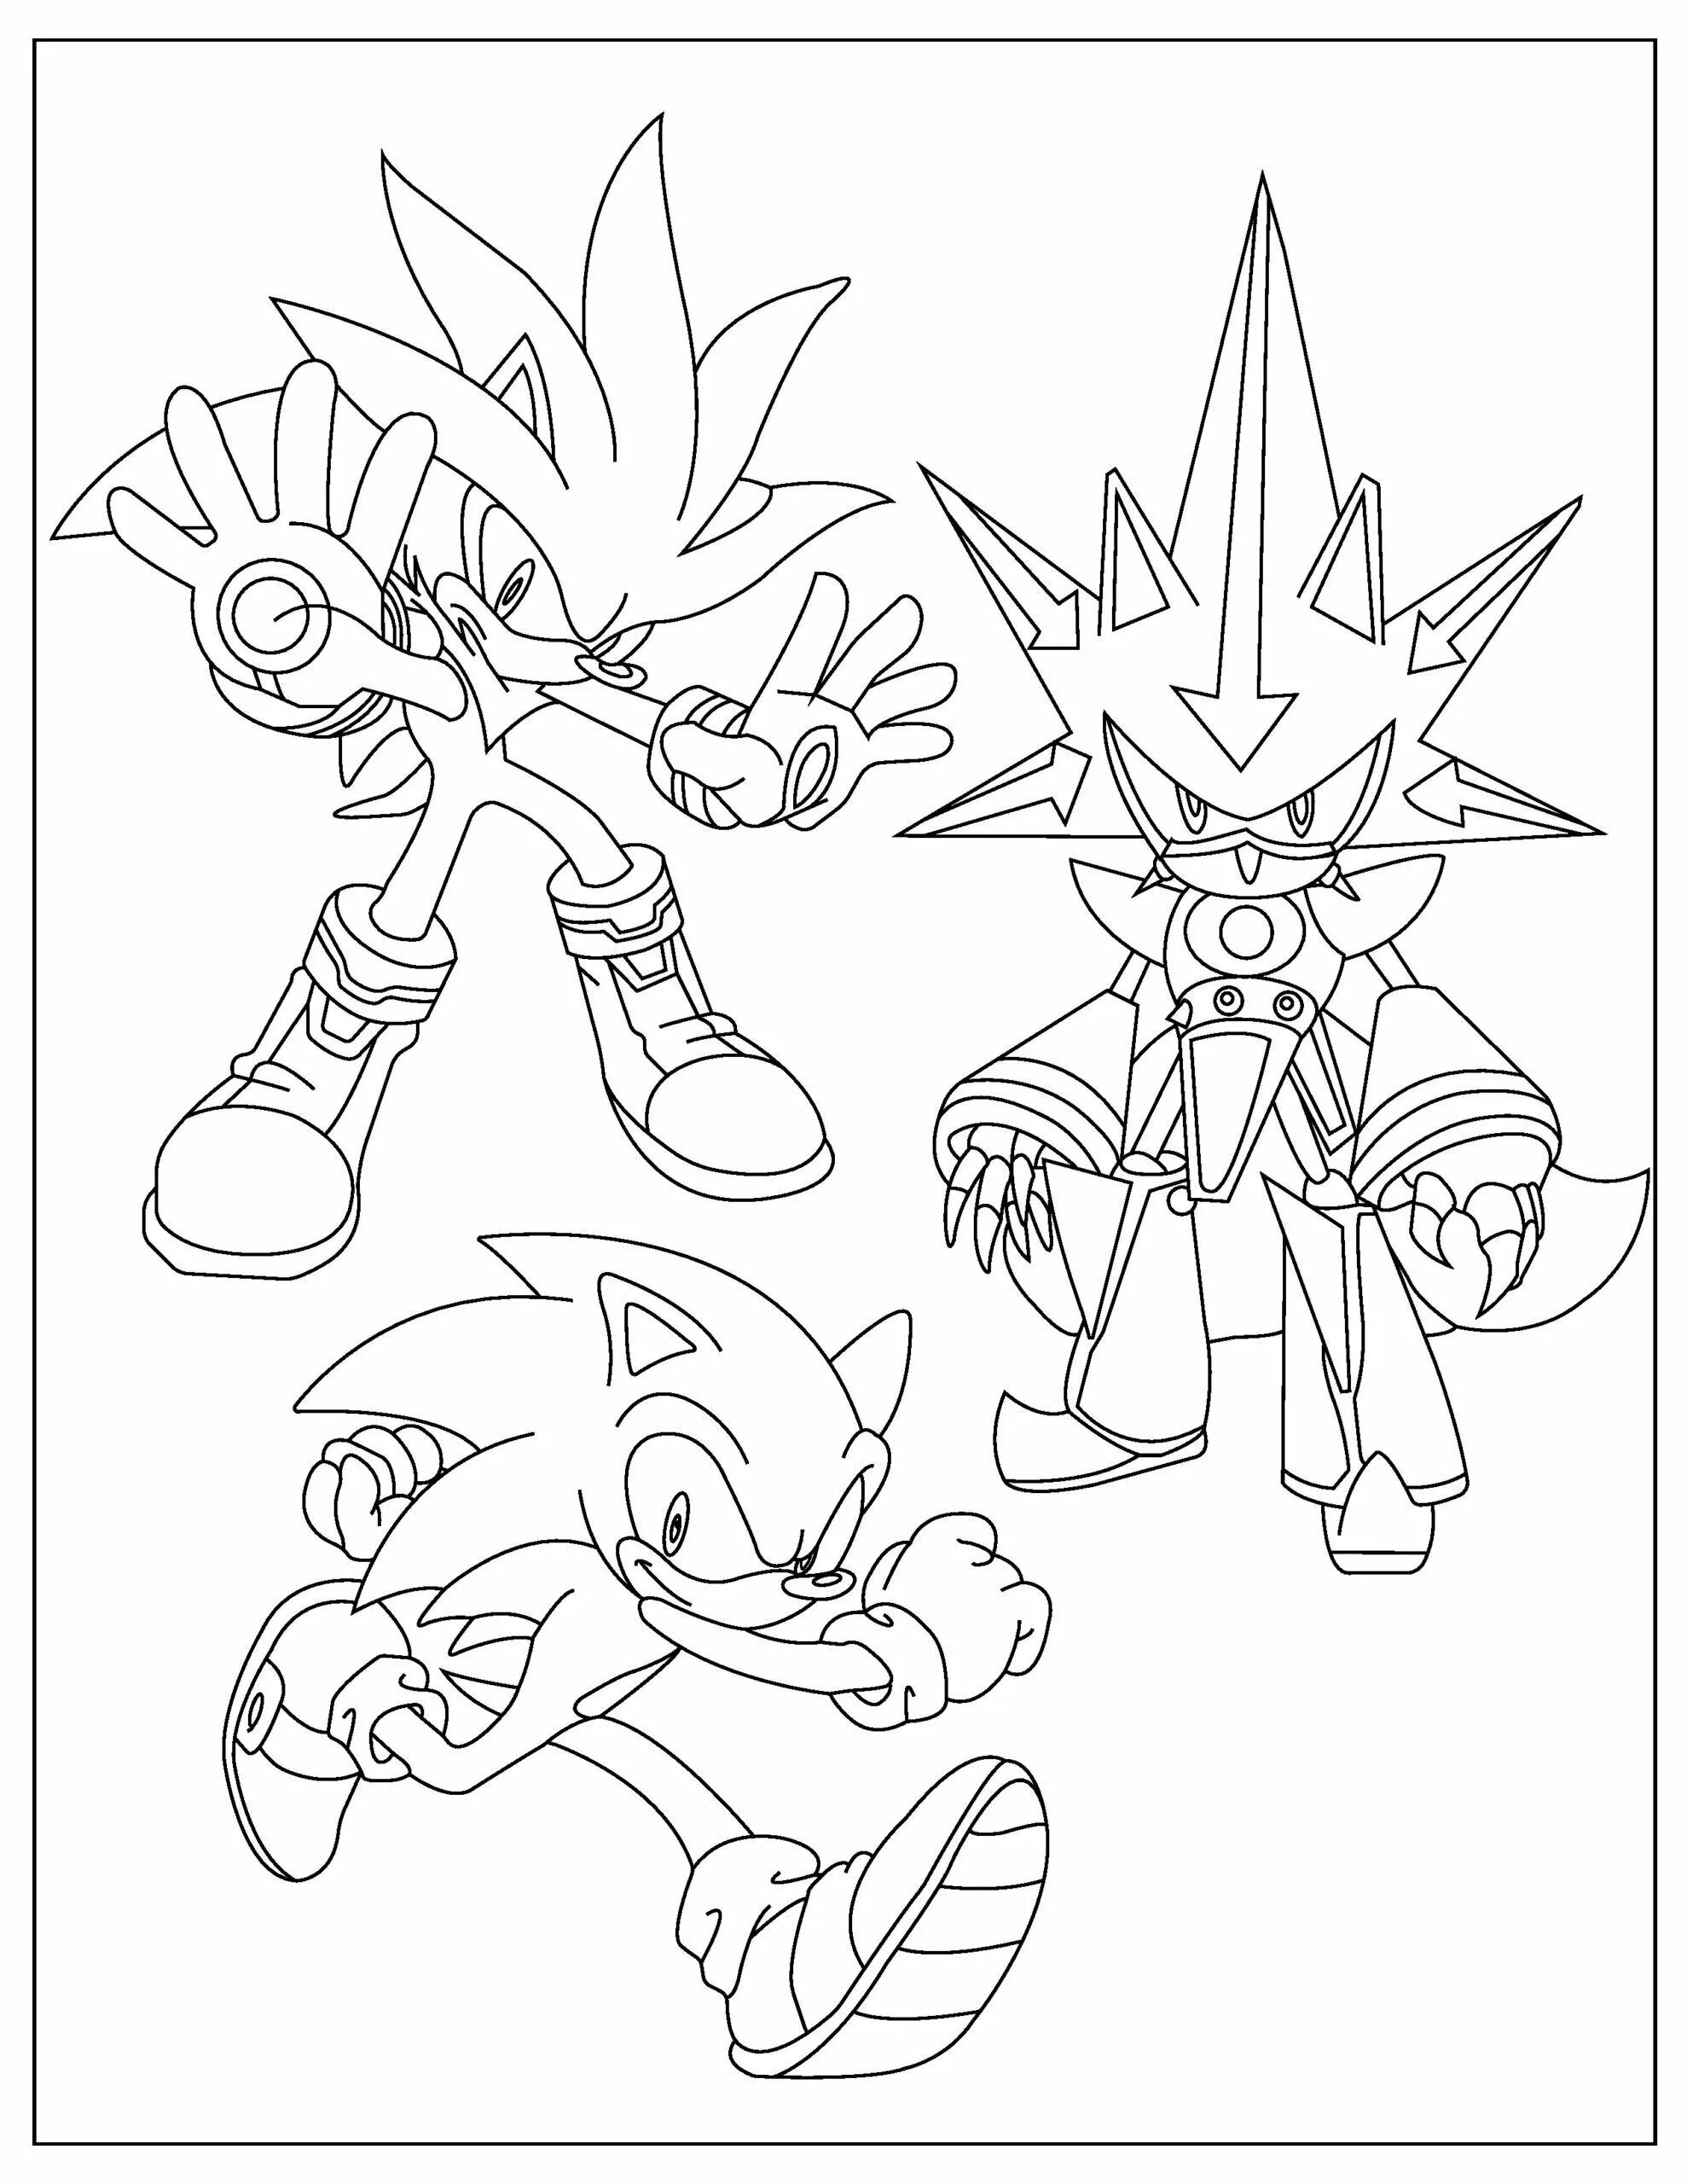 Excalibur sonic coloring page